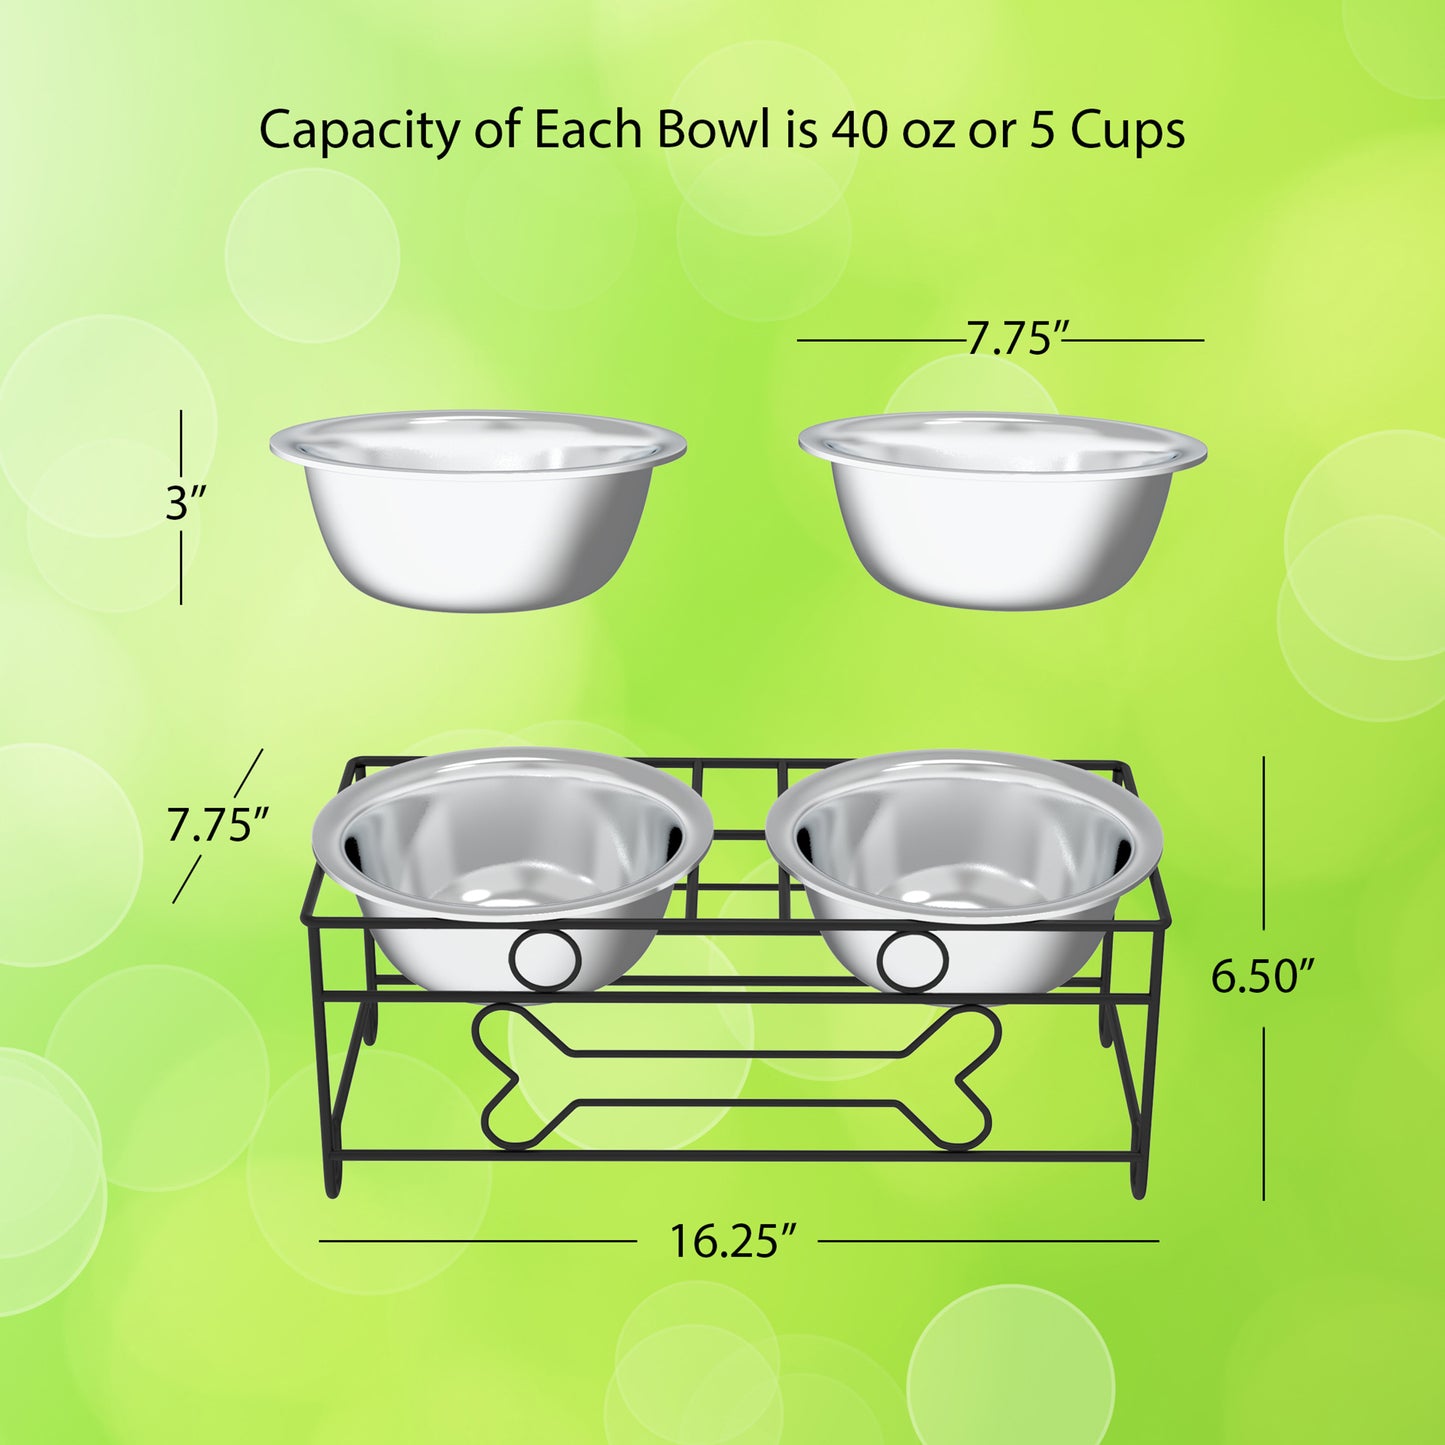 Elevated Dog Feeder with Two Bowls